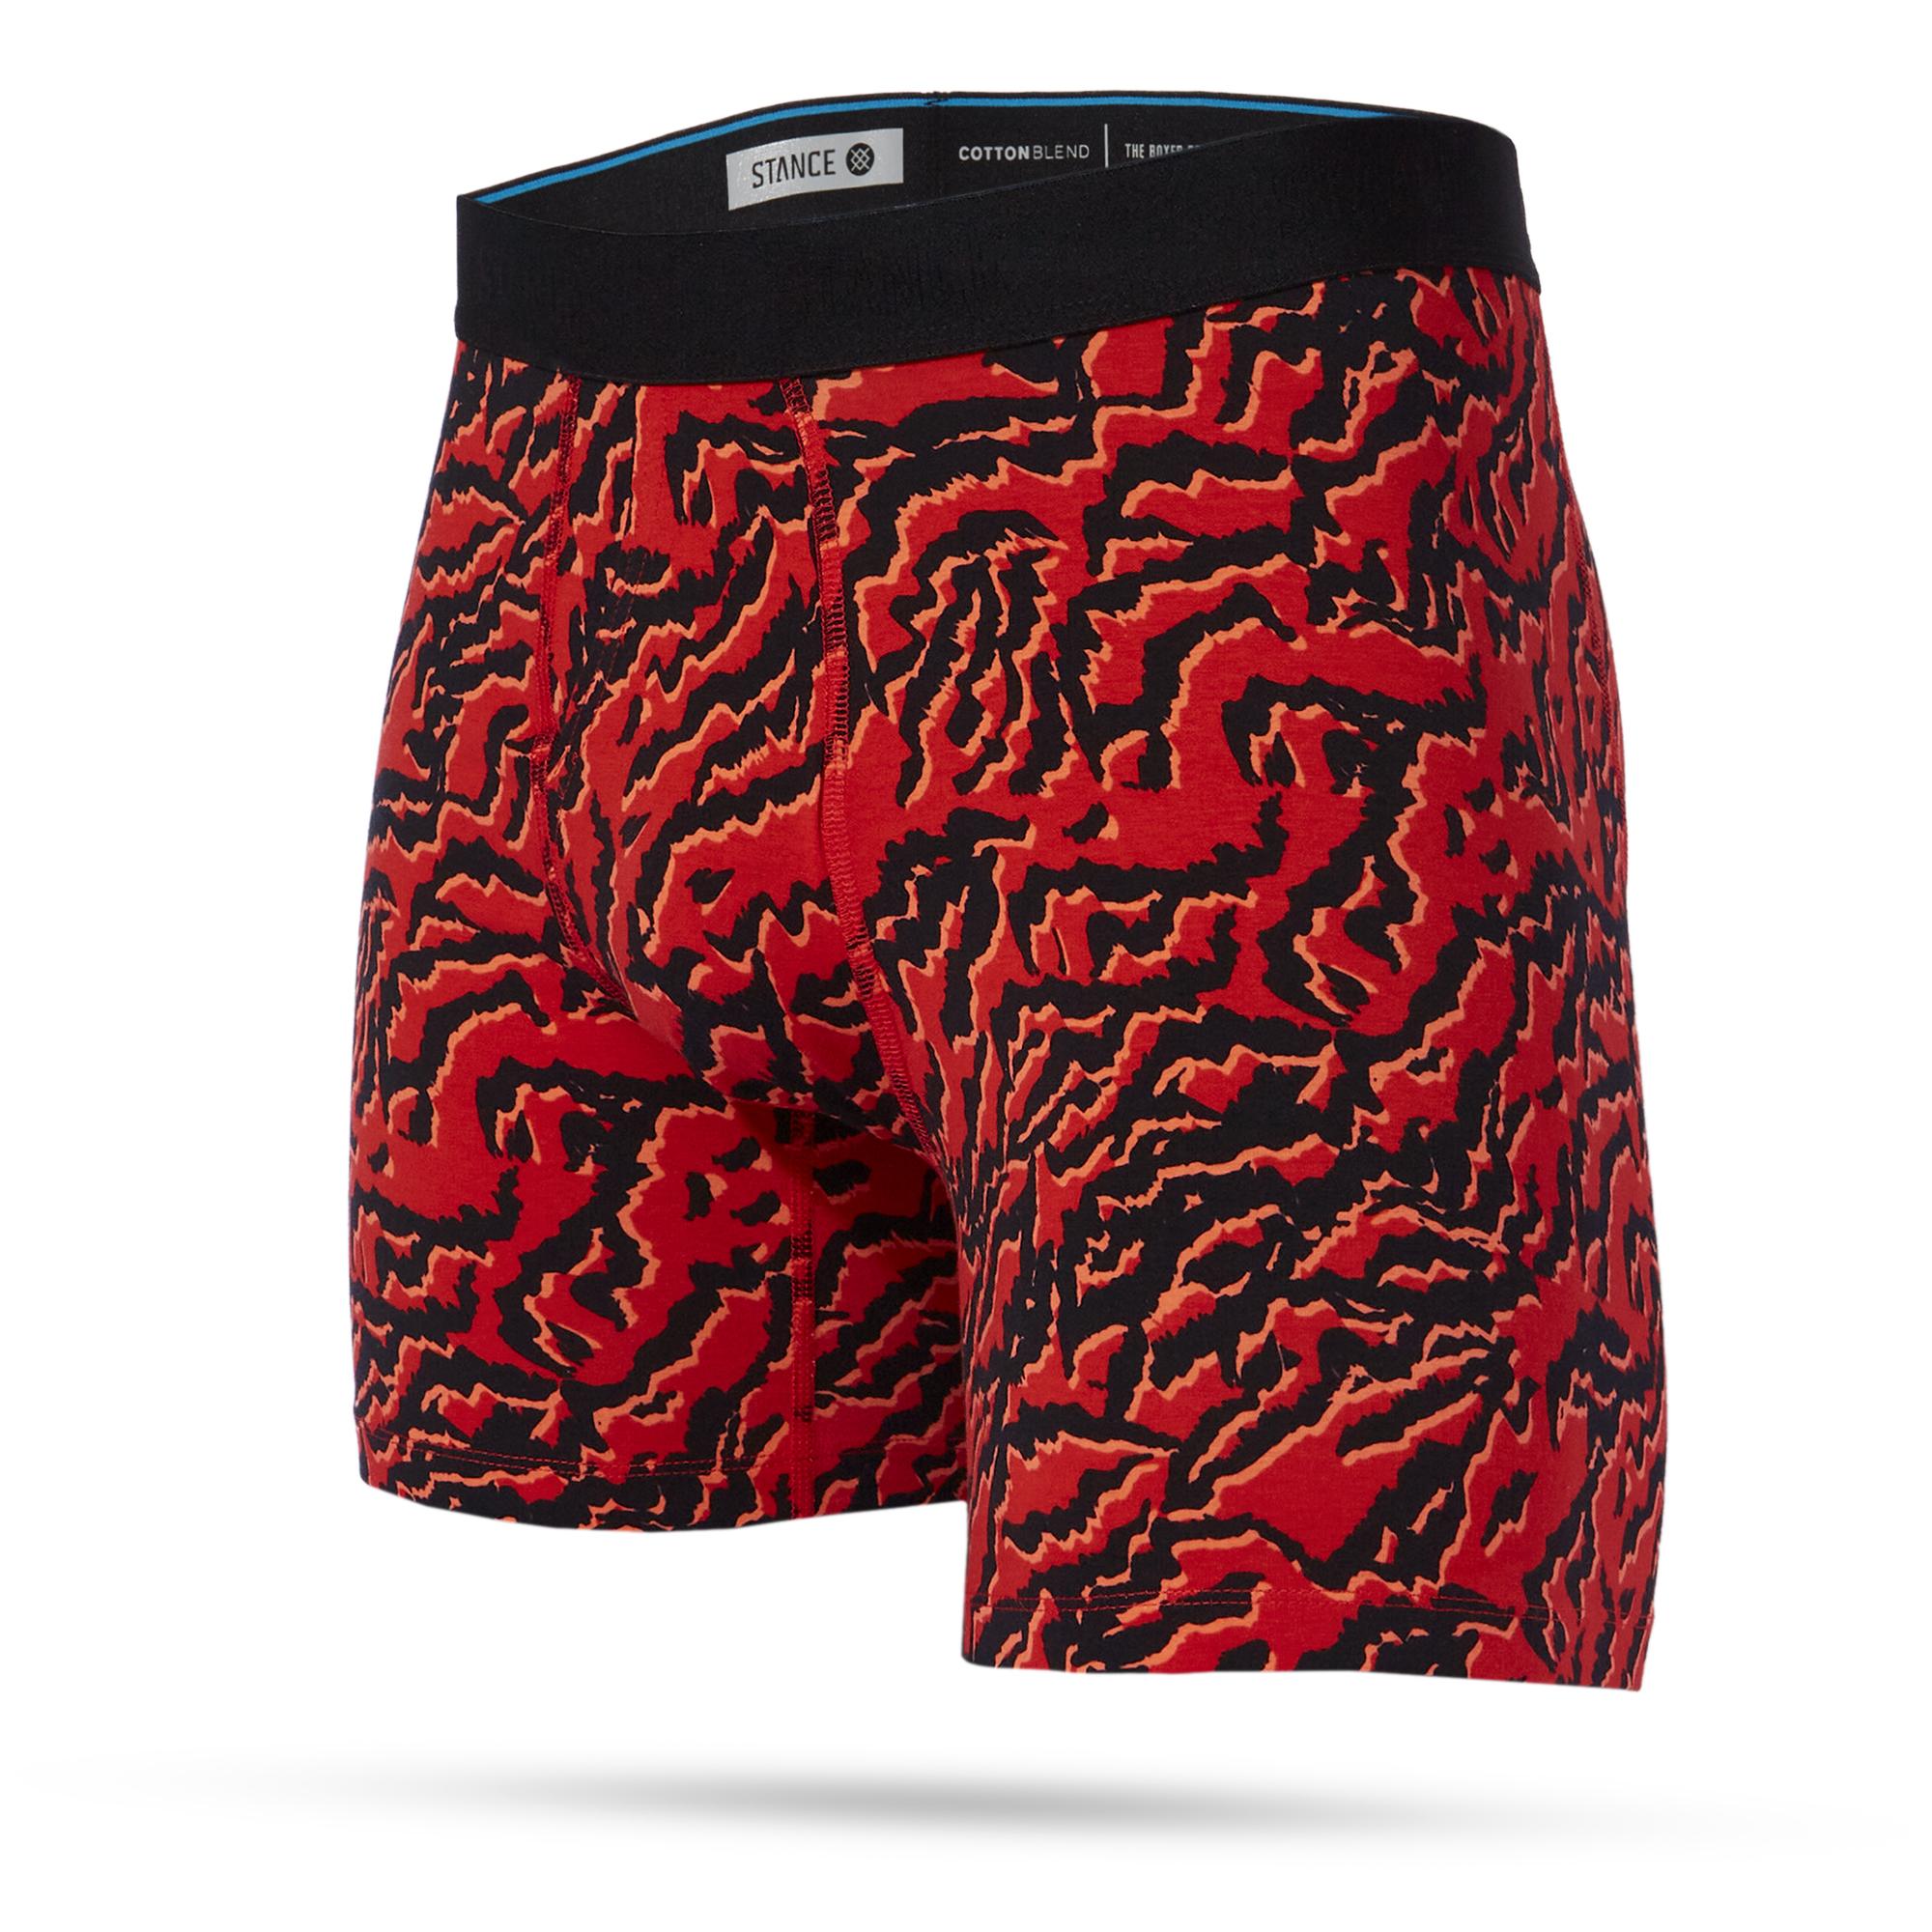 STANCE Levan Wholester Striped Black Blue Red 6 Boxer Briefs